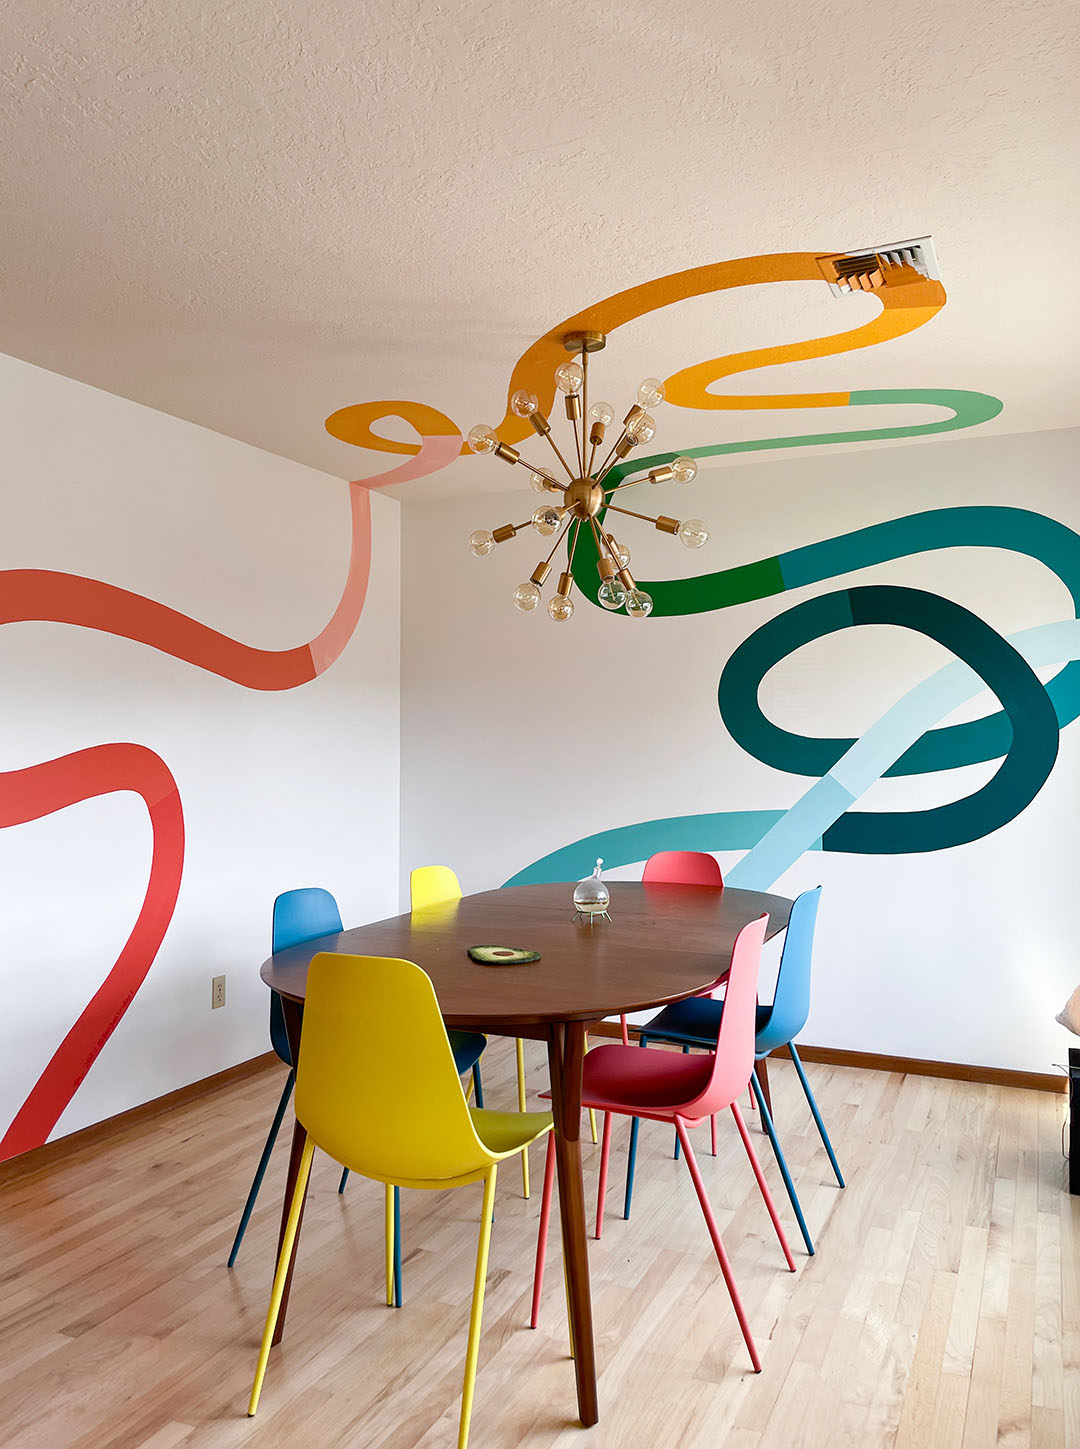 The mural "gummy road" by Racheal Jackson—a colorful, alternating squiggle mural running across the wall and ceiling of a bright kitchen